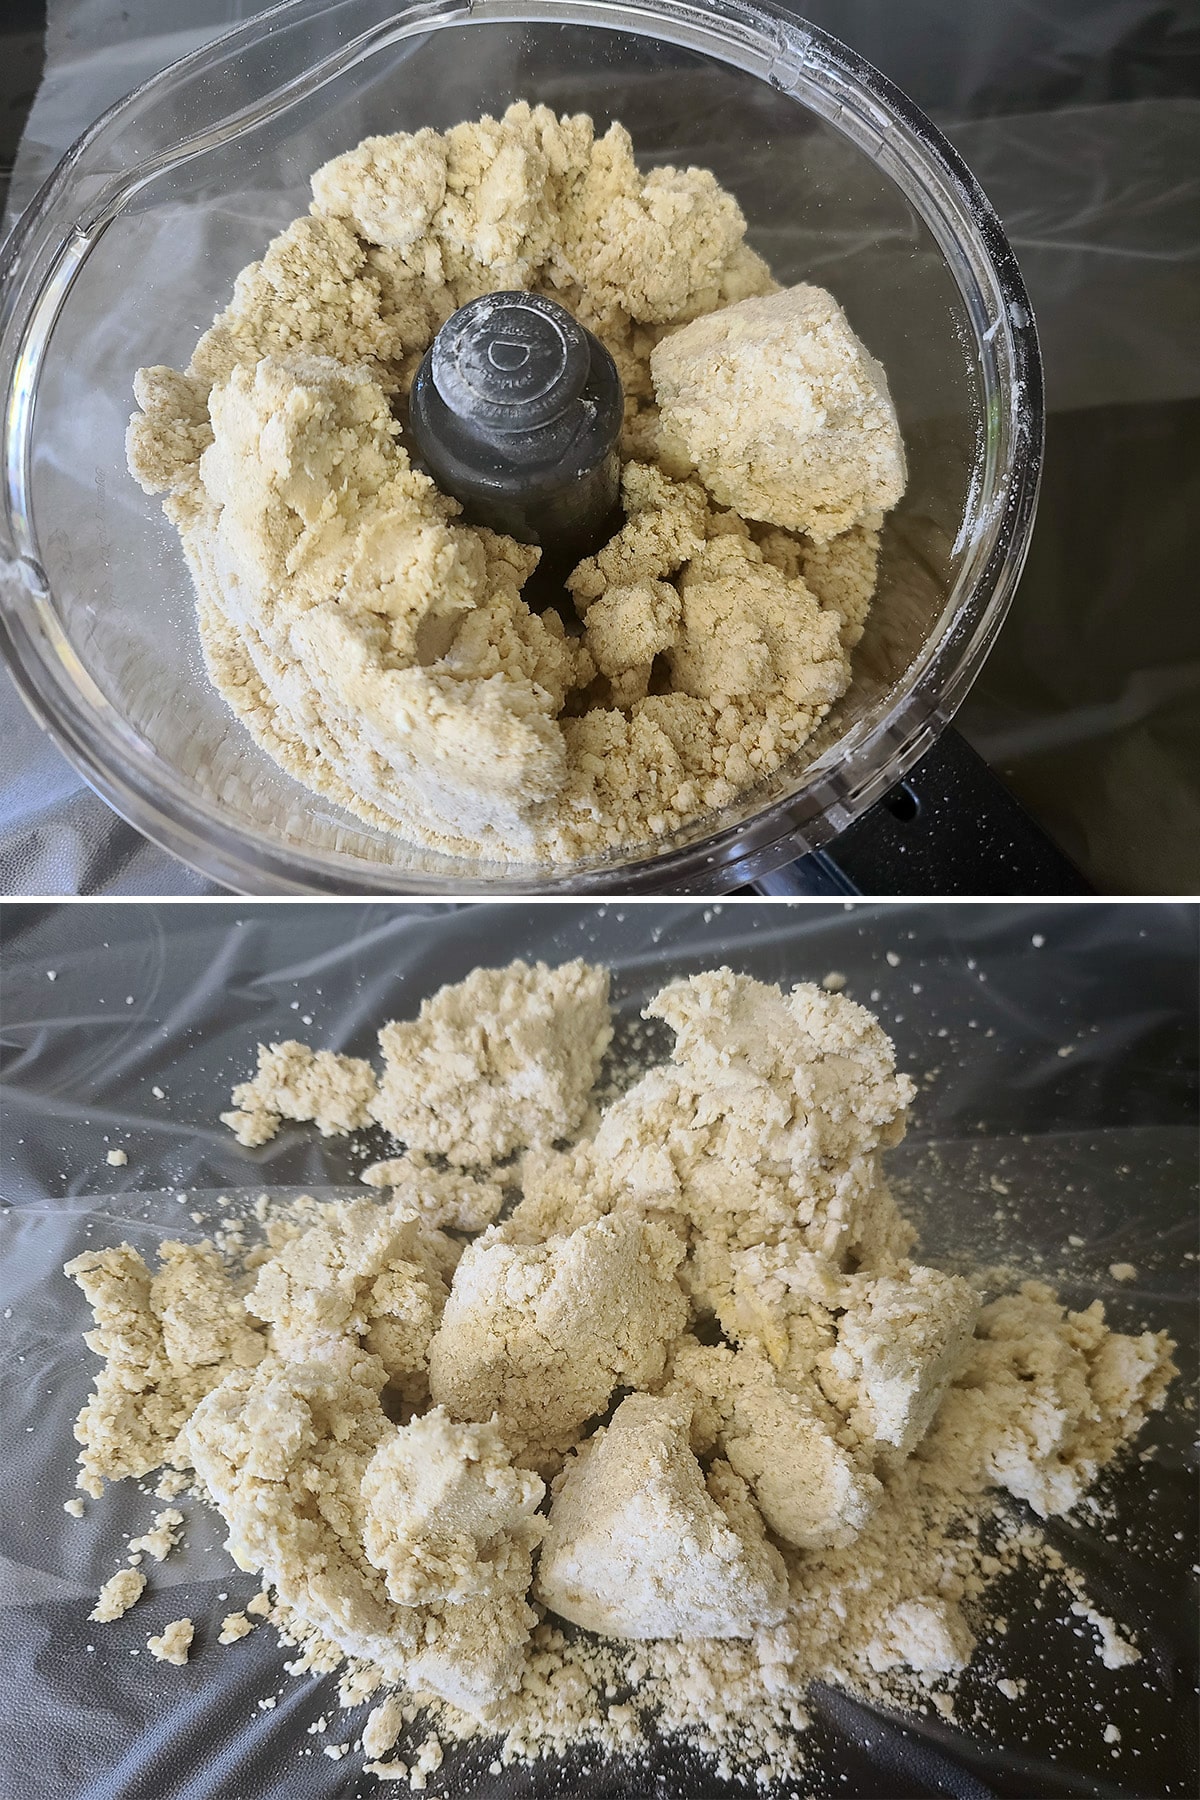 A 2 part image showing the dough in the food processor, then dumped out on parchment.